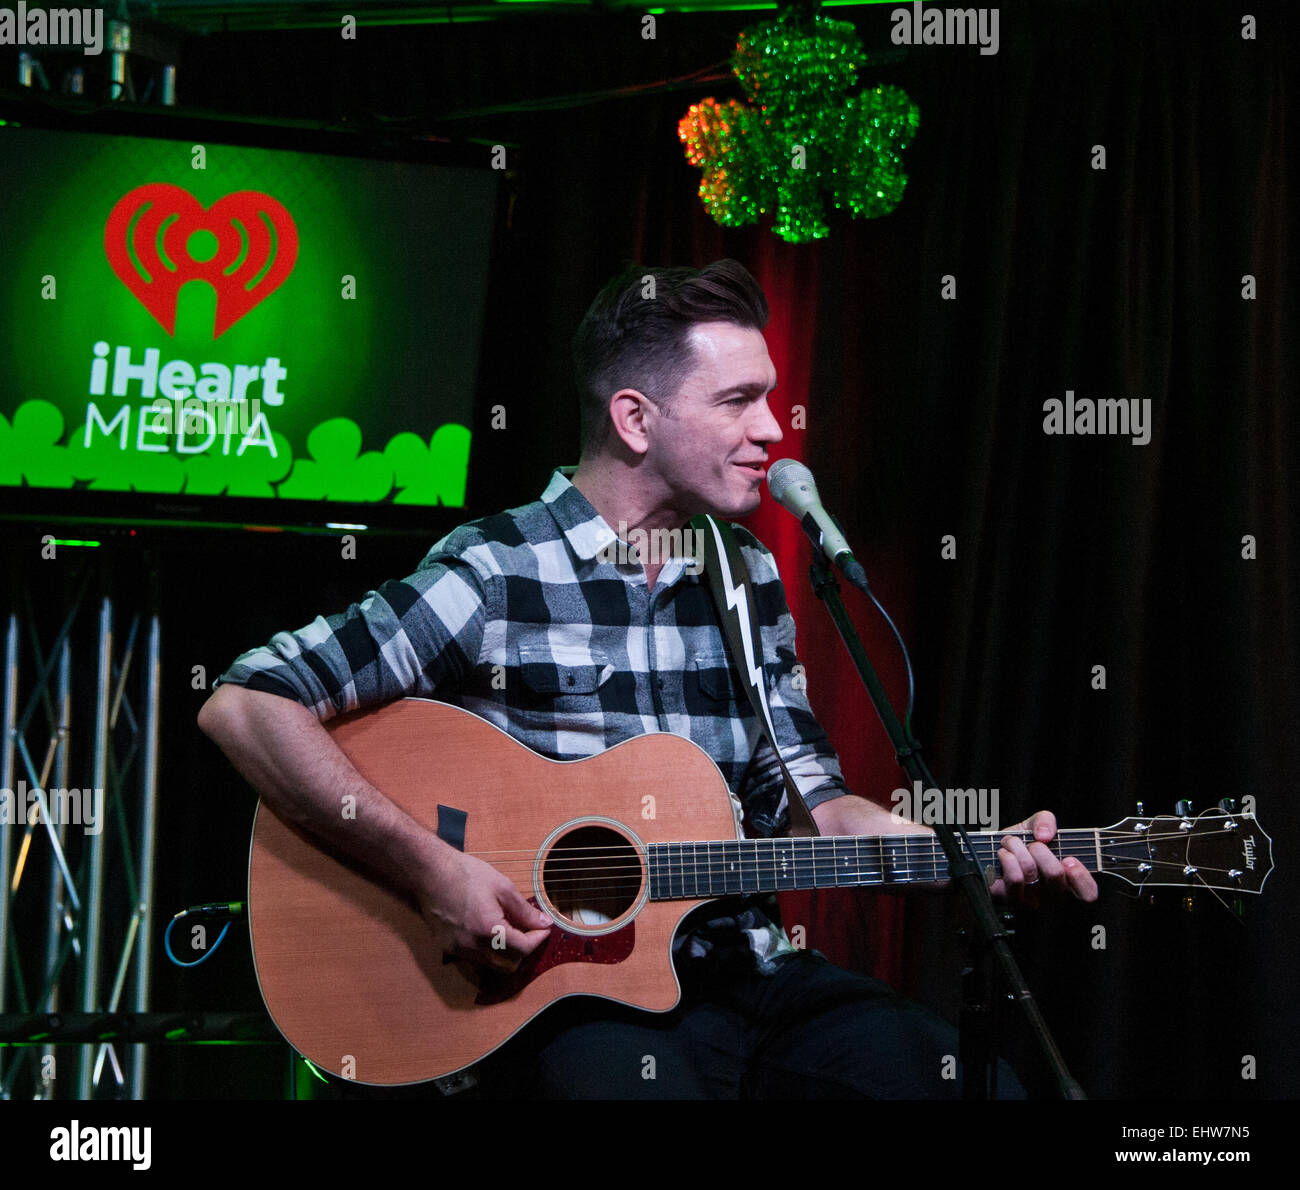 Bala Cynwyd, Pennsylvania, USA. 17 mars, 2015. American Singer-Songwriter Andy Grammer effectue au Mix 106's Performance Theatre le 17 mars 2015 à Bala Cynwyd, Pennsylvania, United States. Crédit : Paul Froggatt/Alamy Live News Banque D'Images